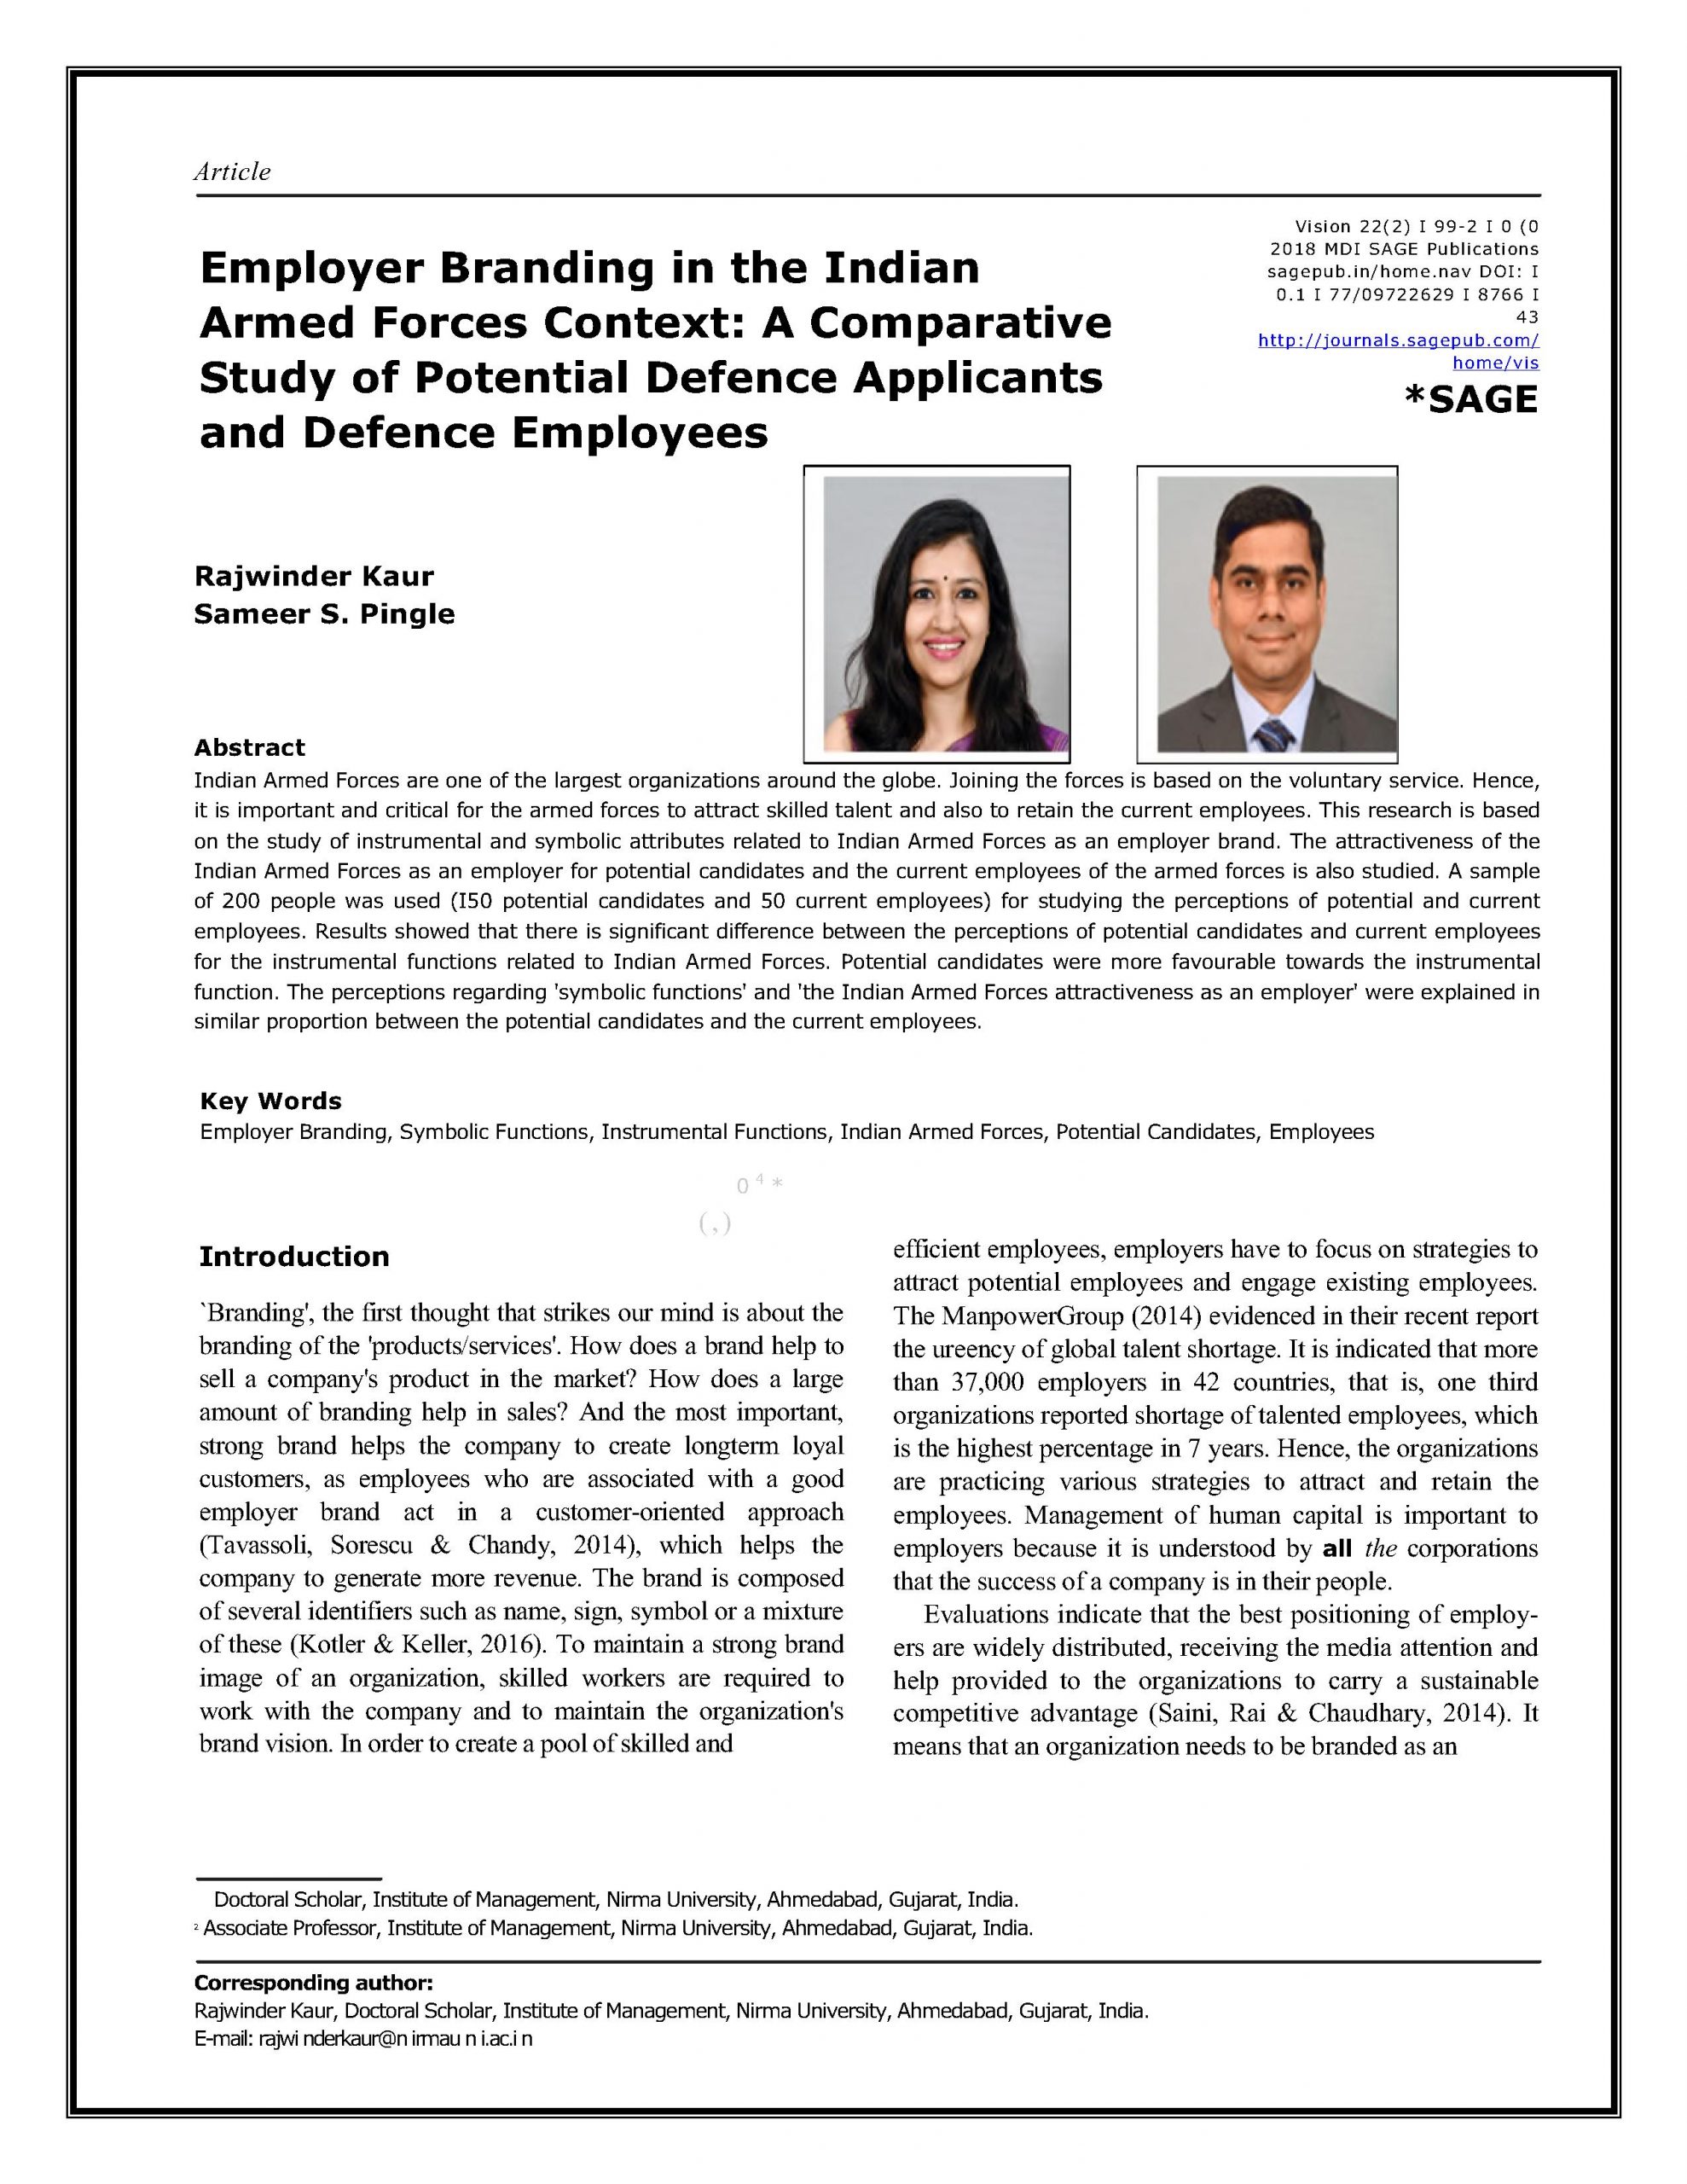 Employer Branding in the Indian Armed Forces Context: A Comparative Study of Potential Defence Applicants and Defense Employees